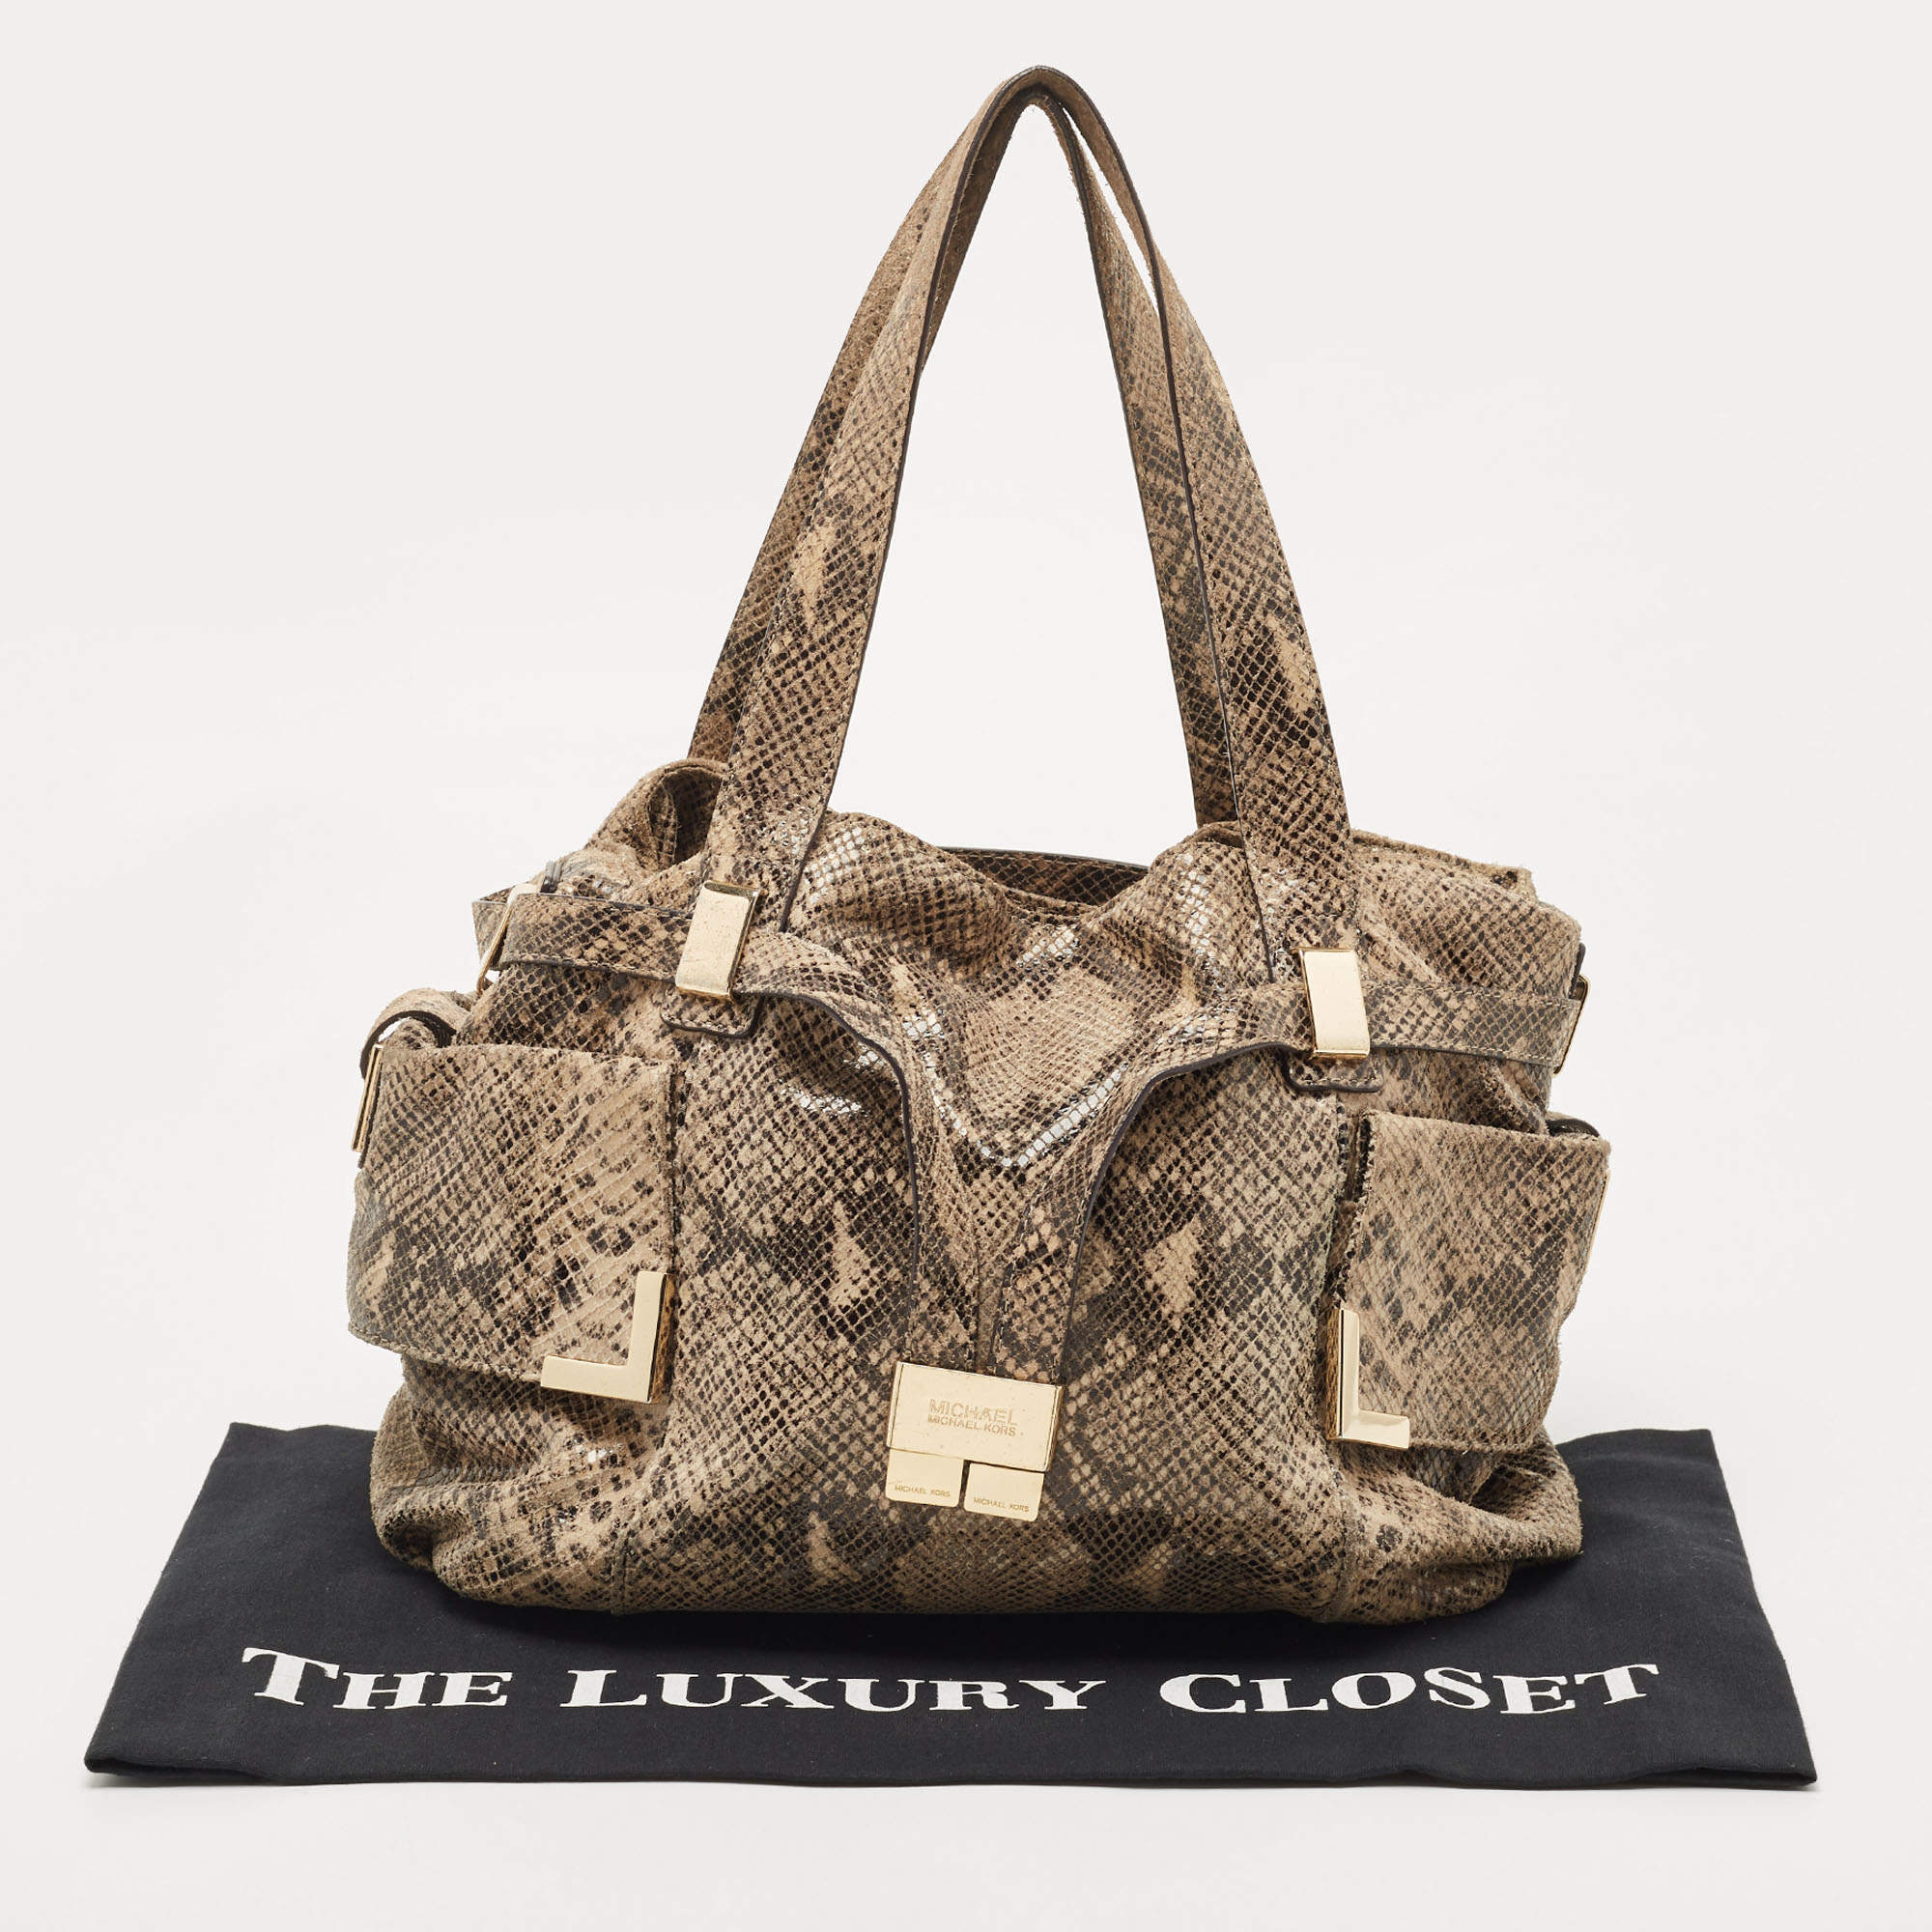 MICHAEL Michael Kors Embossed Python Leather Tote Bag in Natural